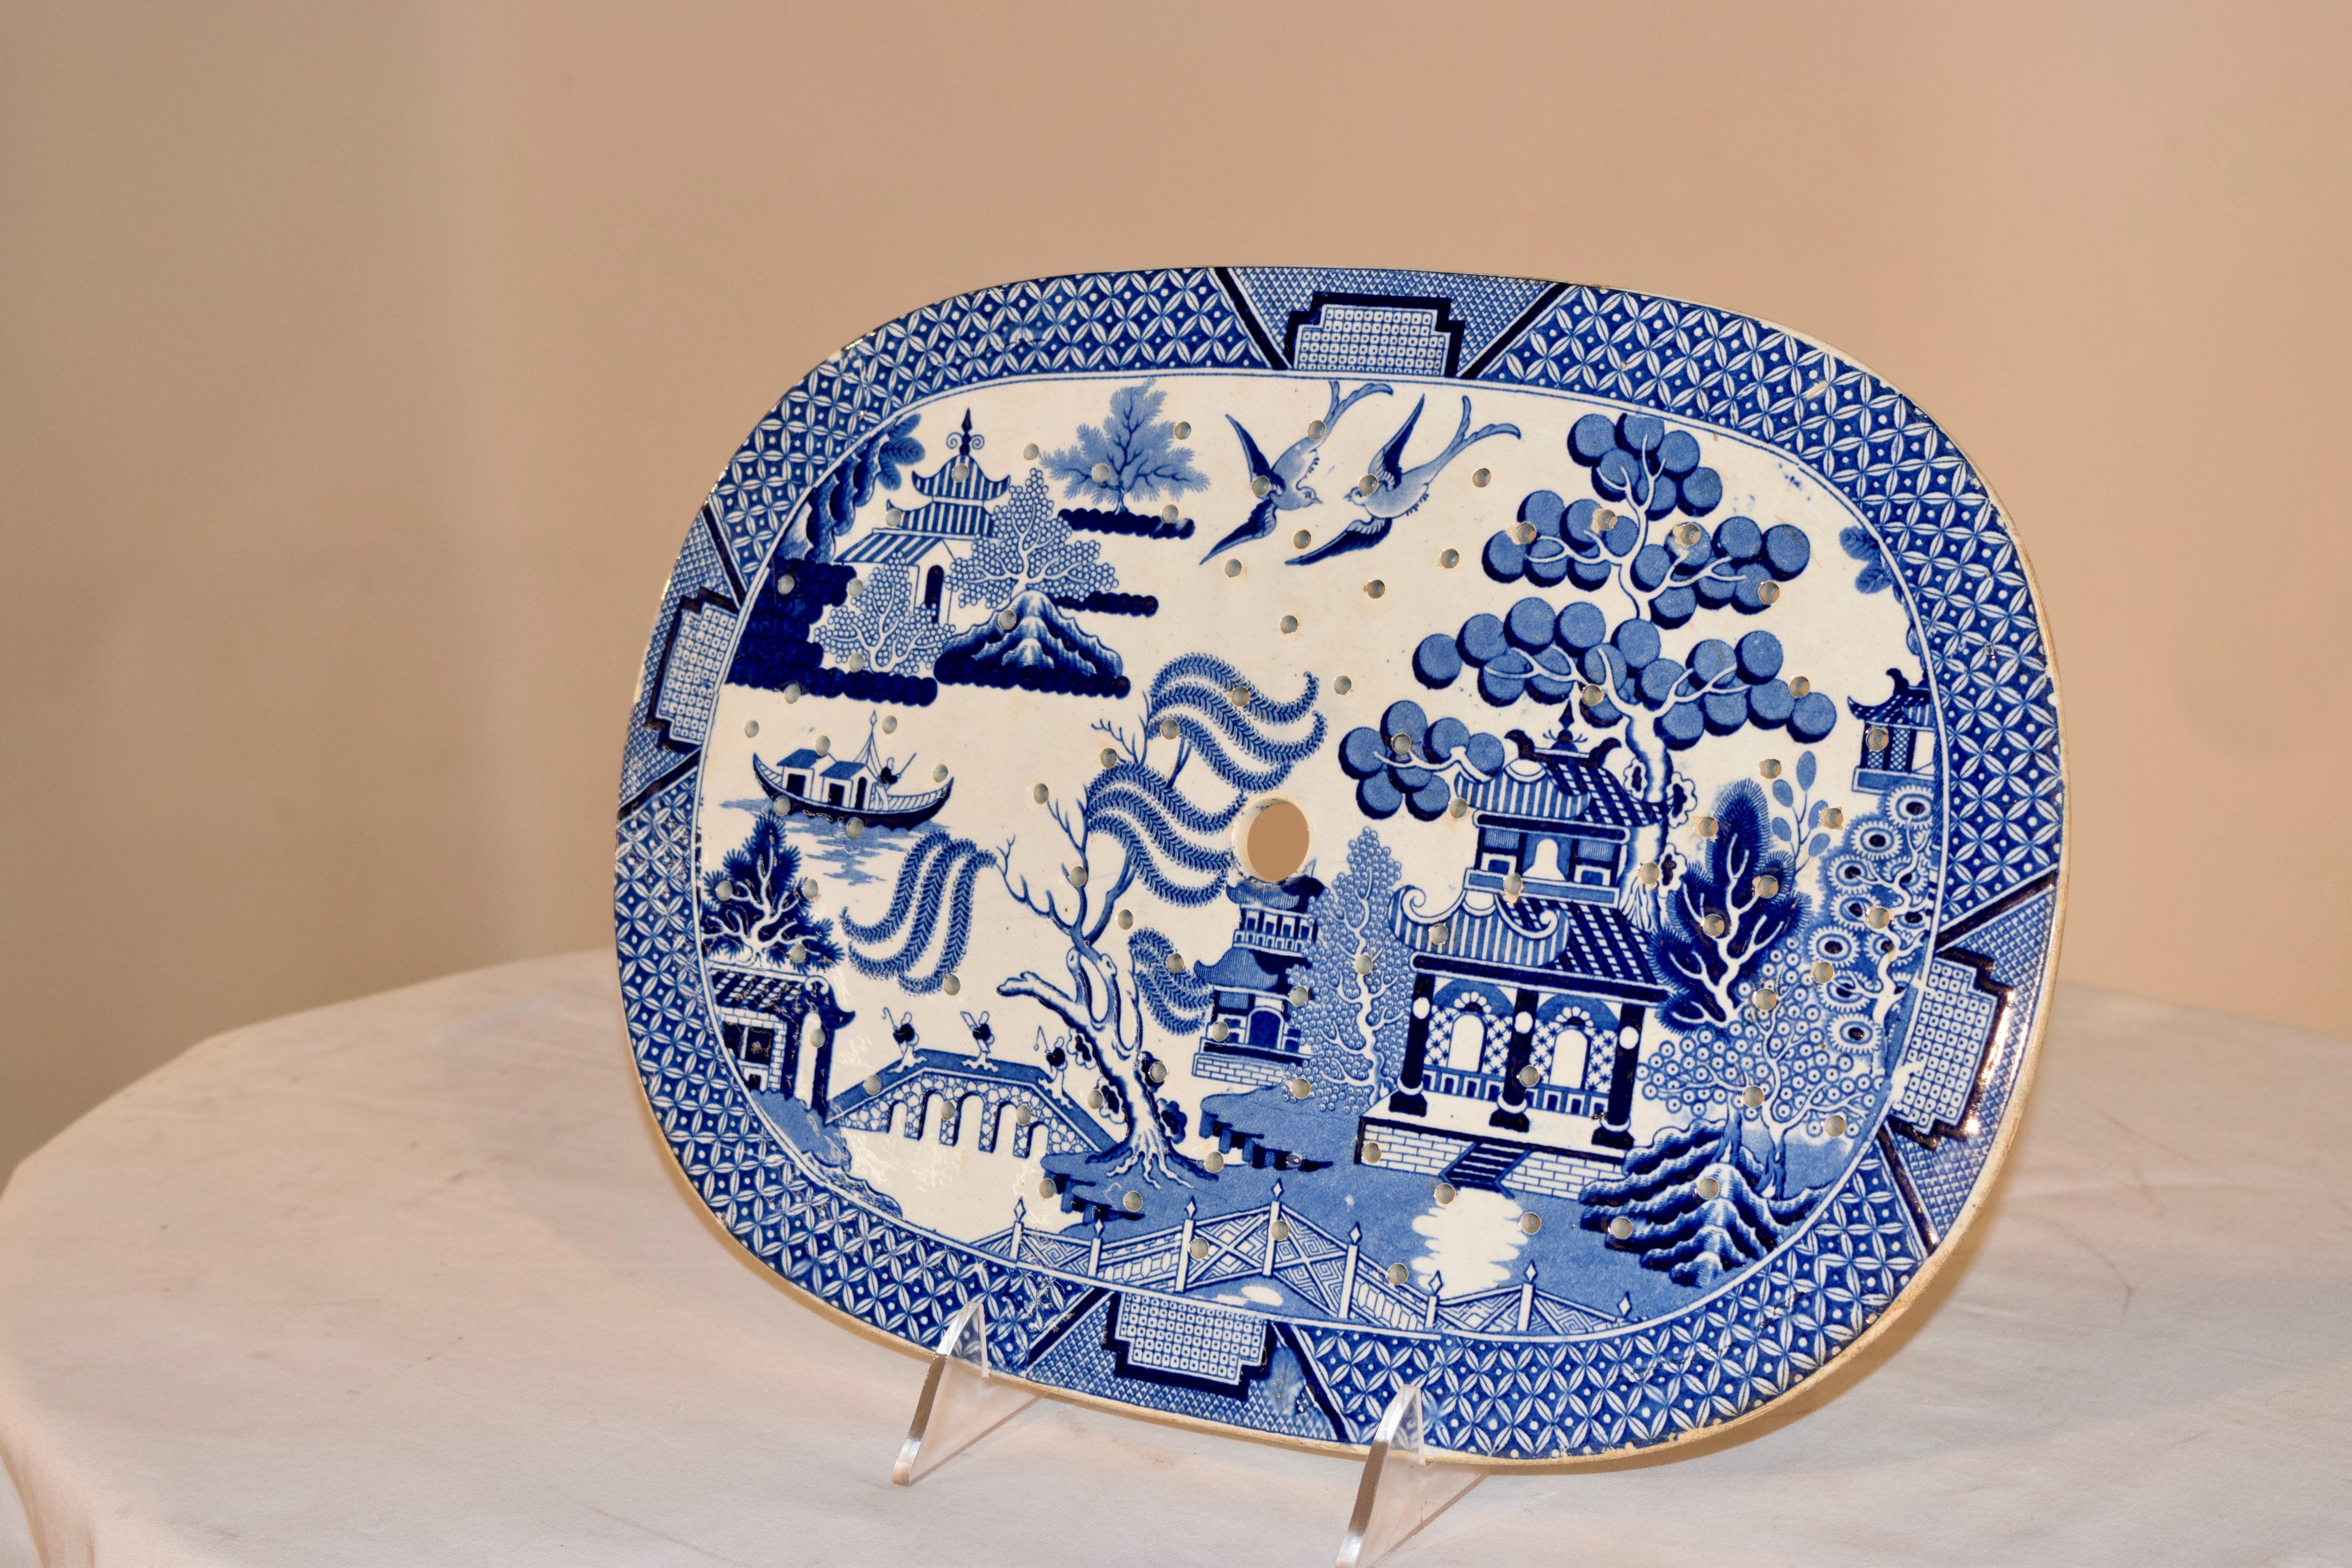 19th century English ceramic drainer in the popular blue willow pattern. Lovely form.